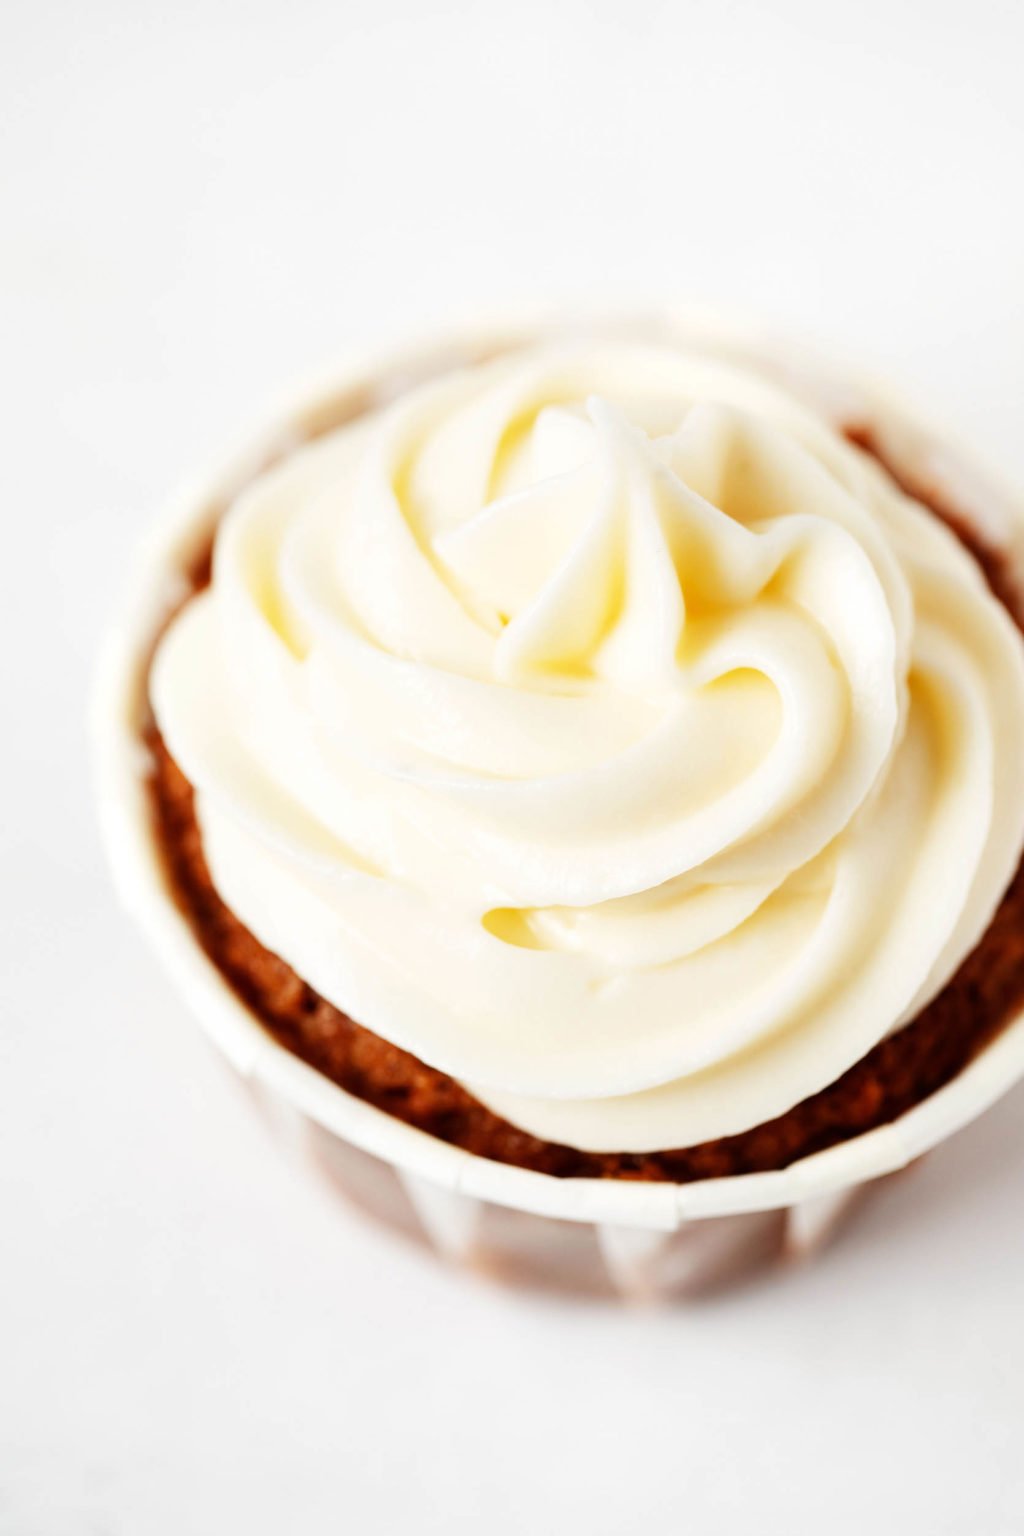 A vegan cupcake has been swirled with a rich, pale colored cream cheese frosting.